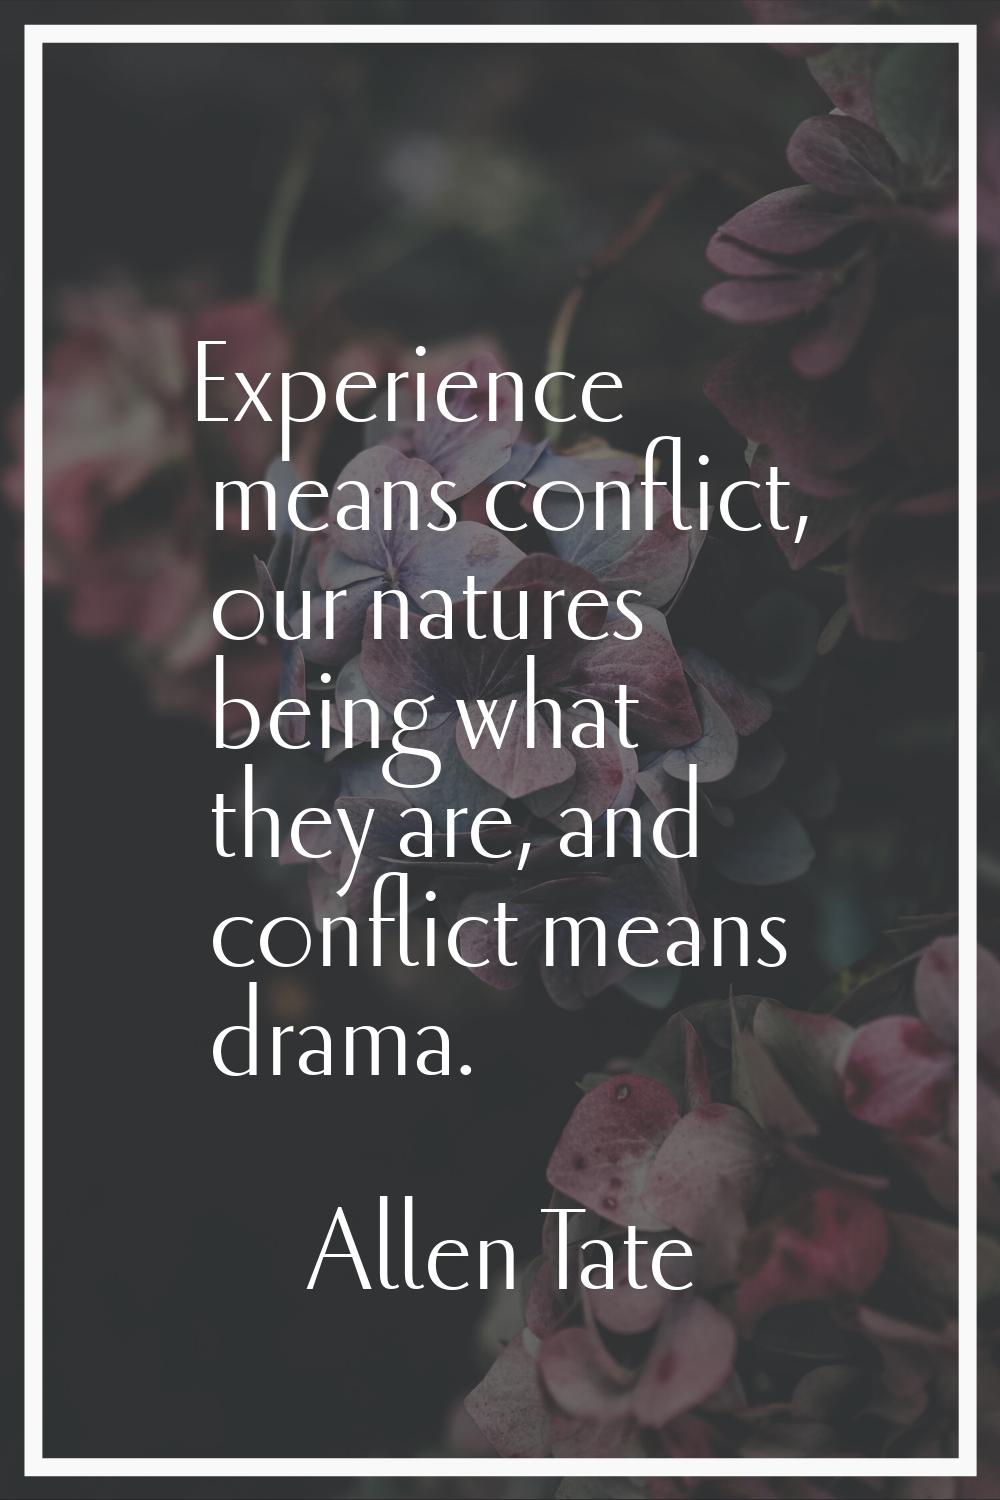 Experience means conflict, our natures being what they are, and conflict means drama.